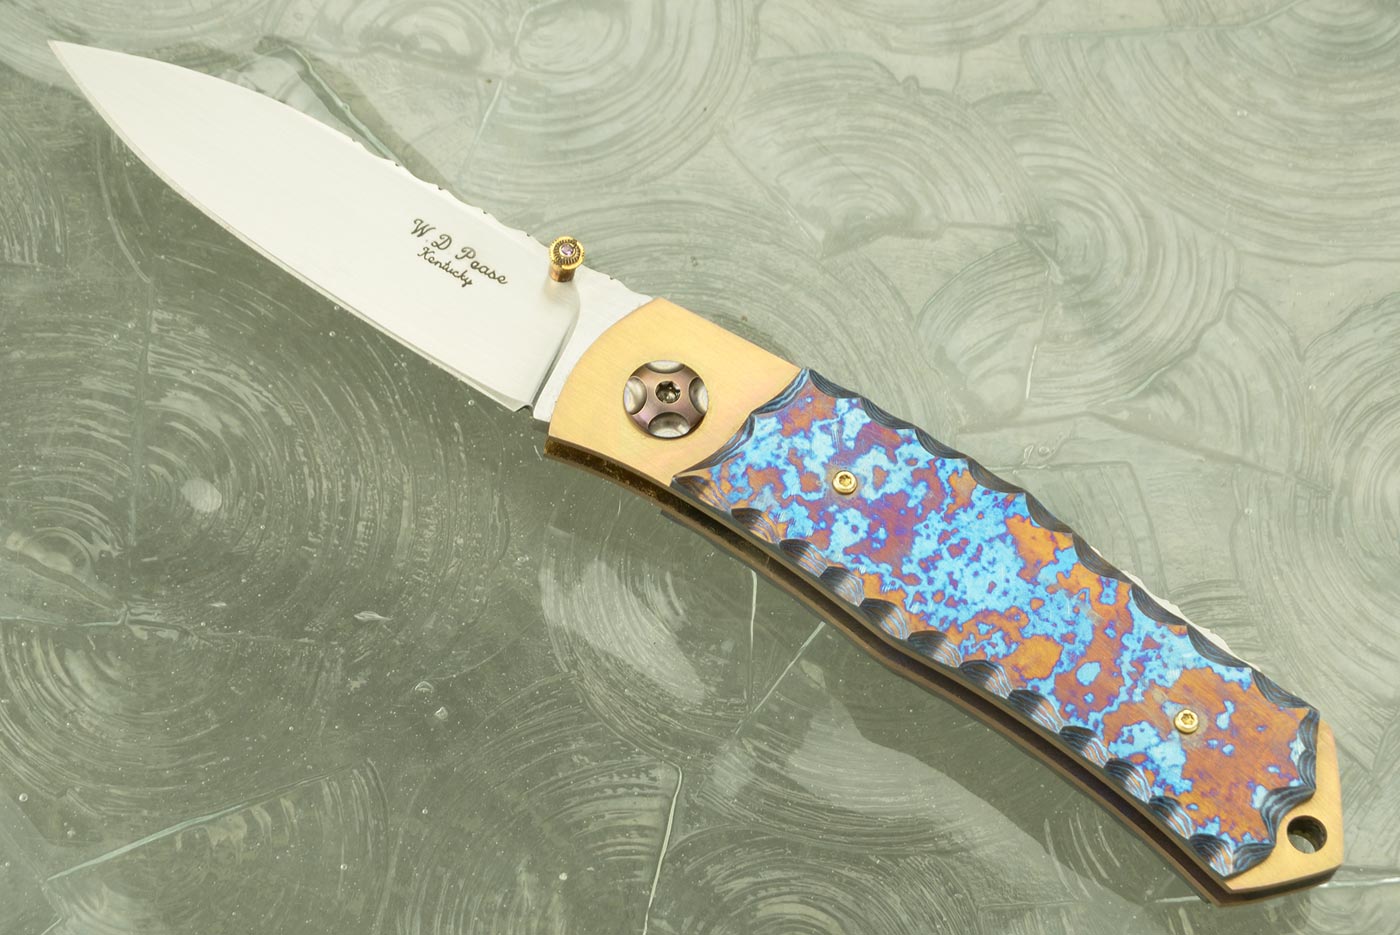 Backlock Folder with Timascus